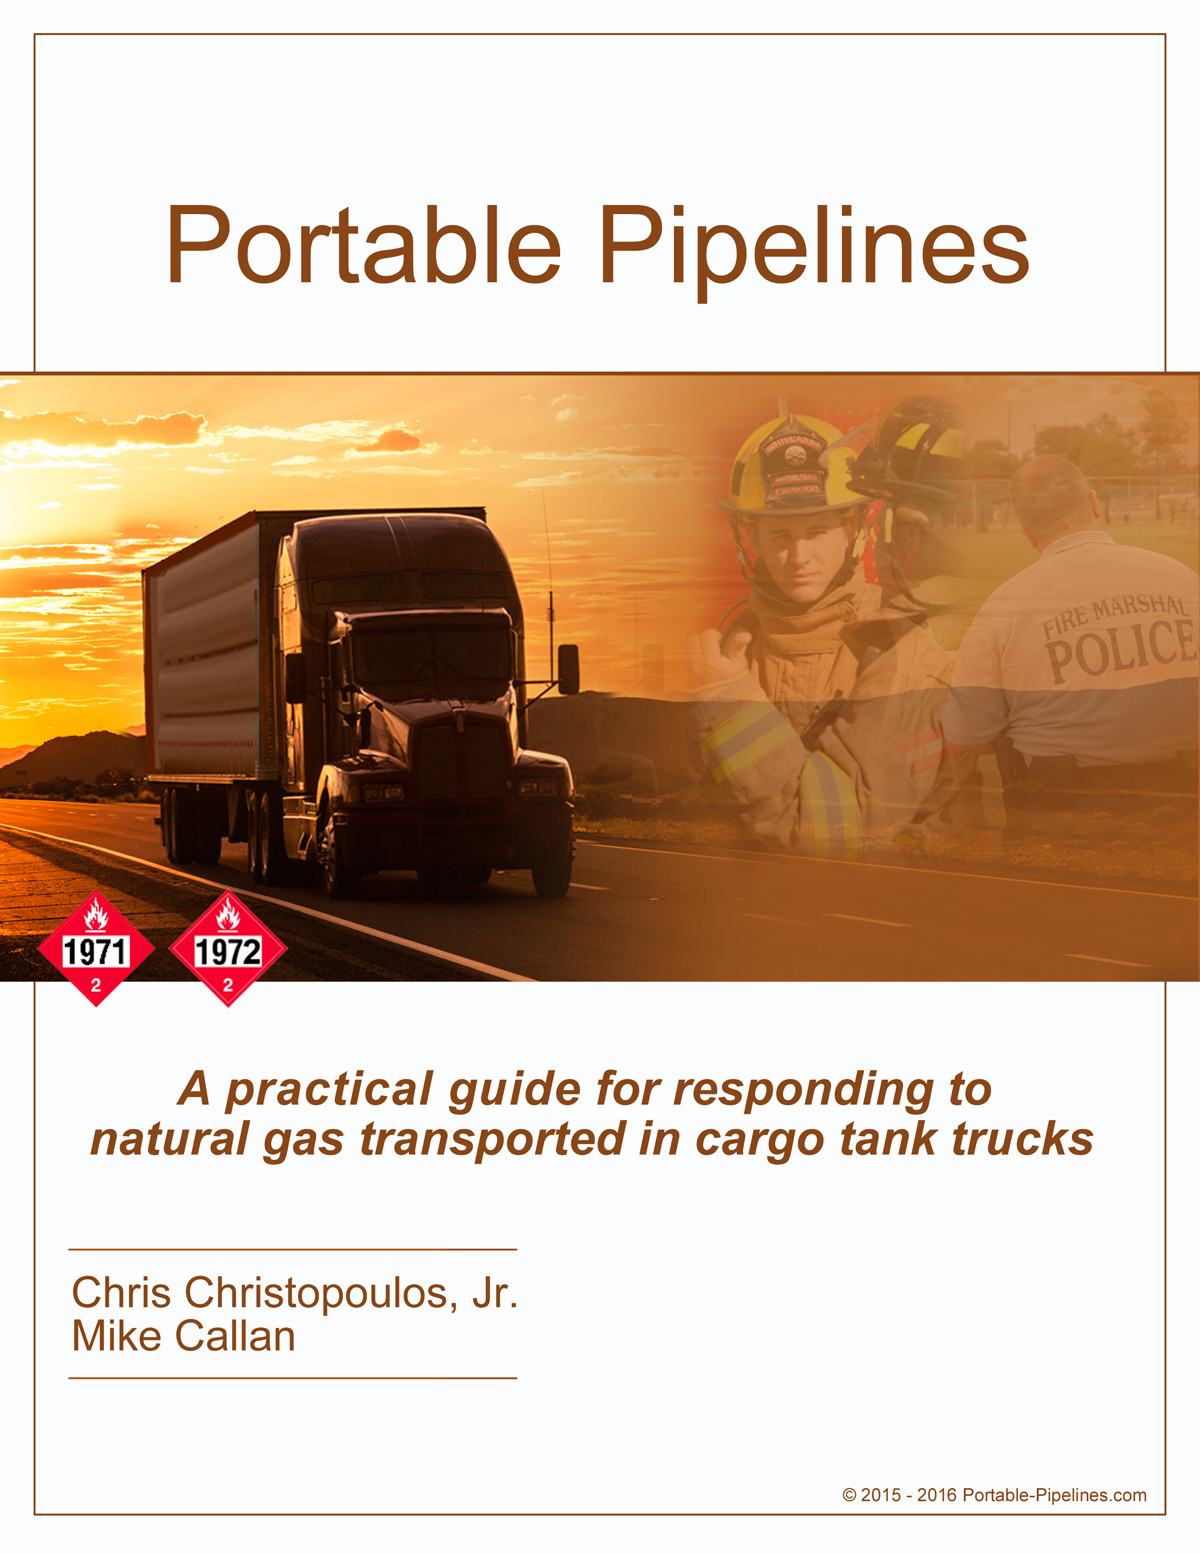 A practical guide for responding to natural gas transported in cargo tank trucks